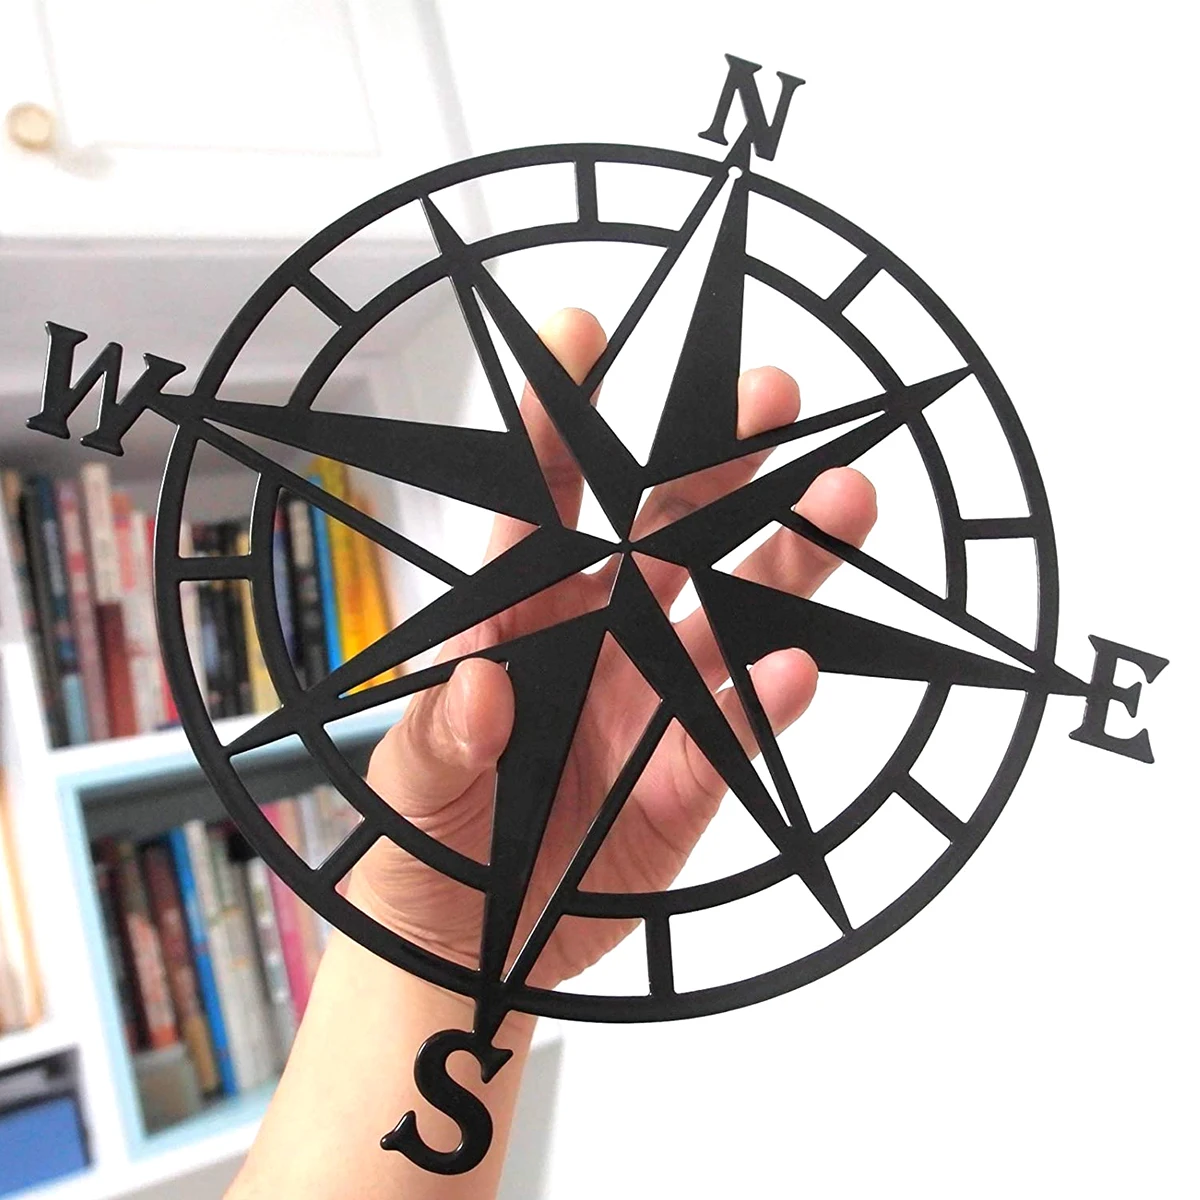 

11 Inch Creative Metal Decoration Nautical Compass Wall Decoration Living Room Bedroom Office Porch Garden Terrace Decor